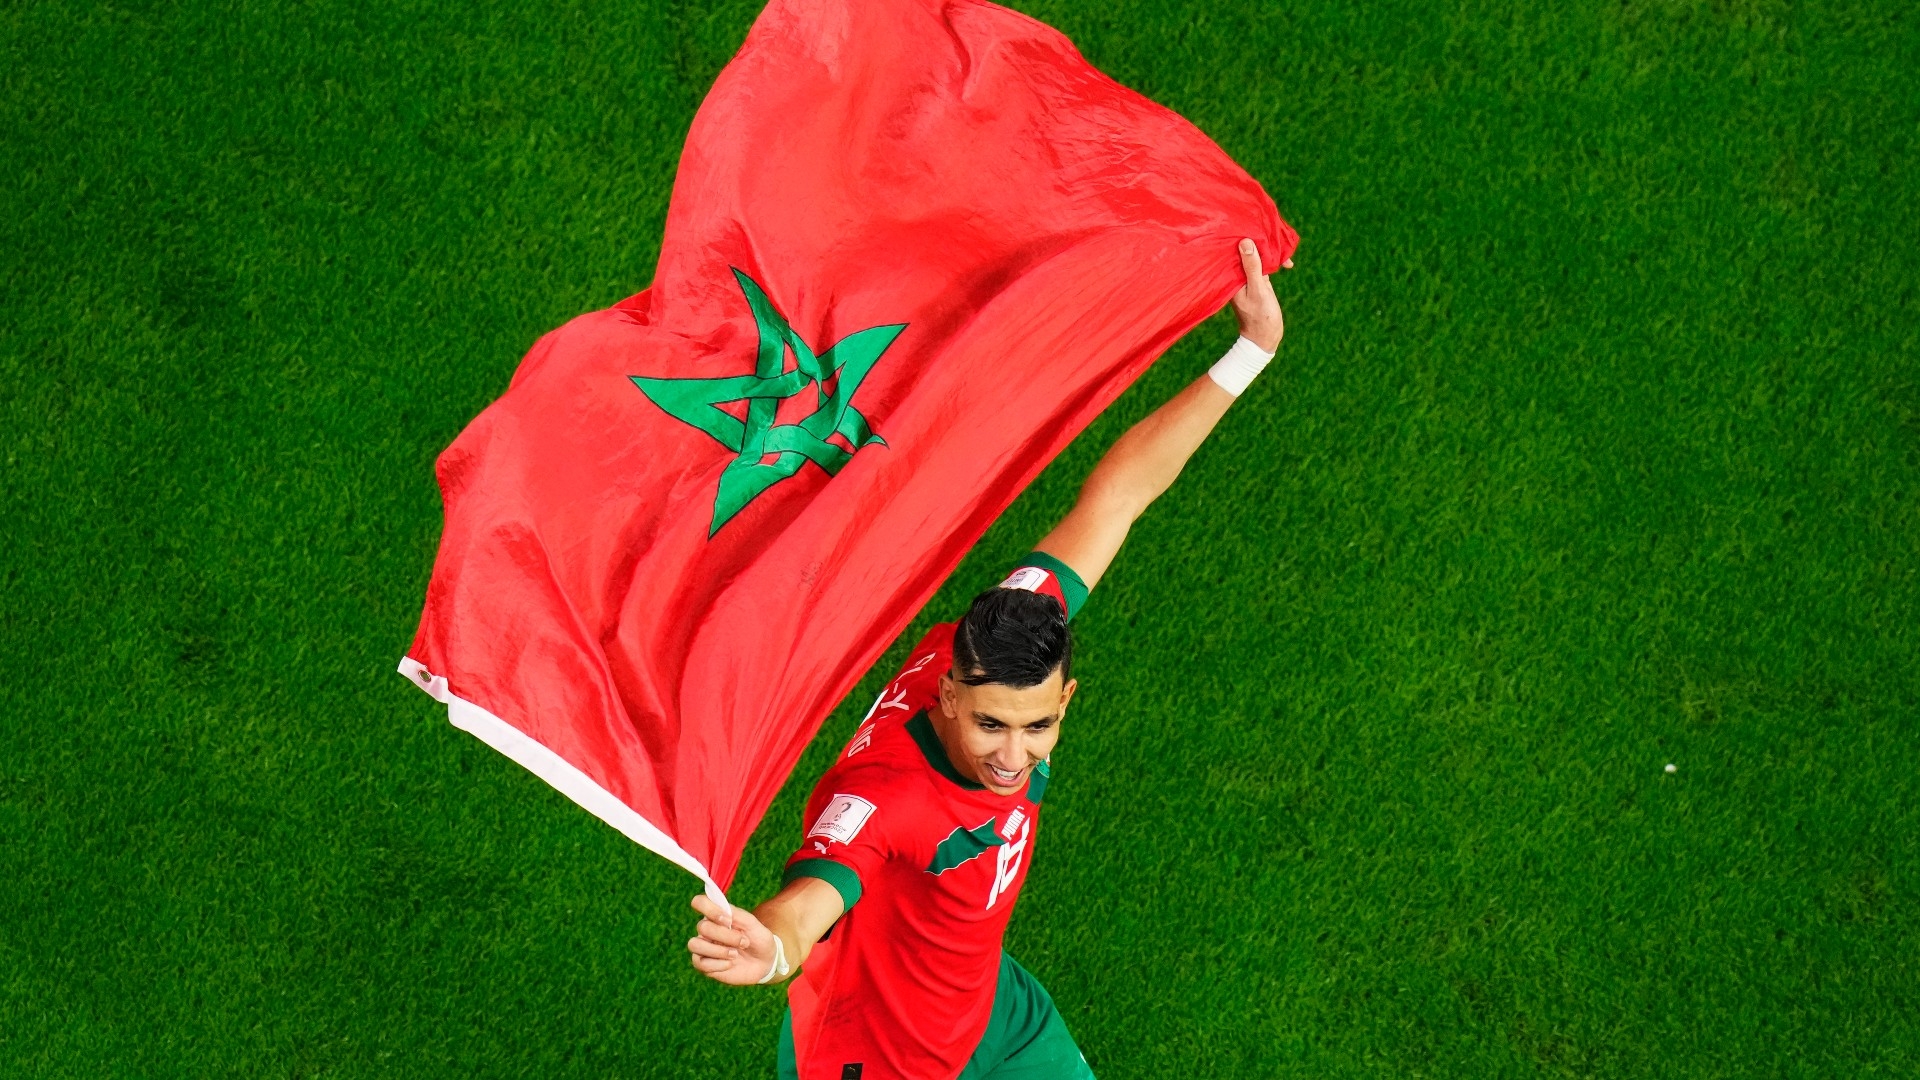 Morocco's Jawad El Yamiq celebrates after the World Cup round of 16 soccer match between Morocco and Spain, at the Education City Stadium in Al Rayyan, Qatar, on 6 December, 2022 (AFP)